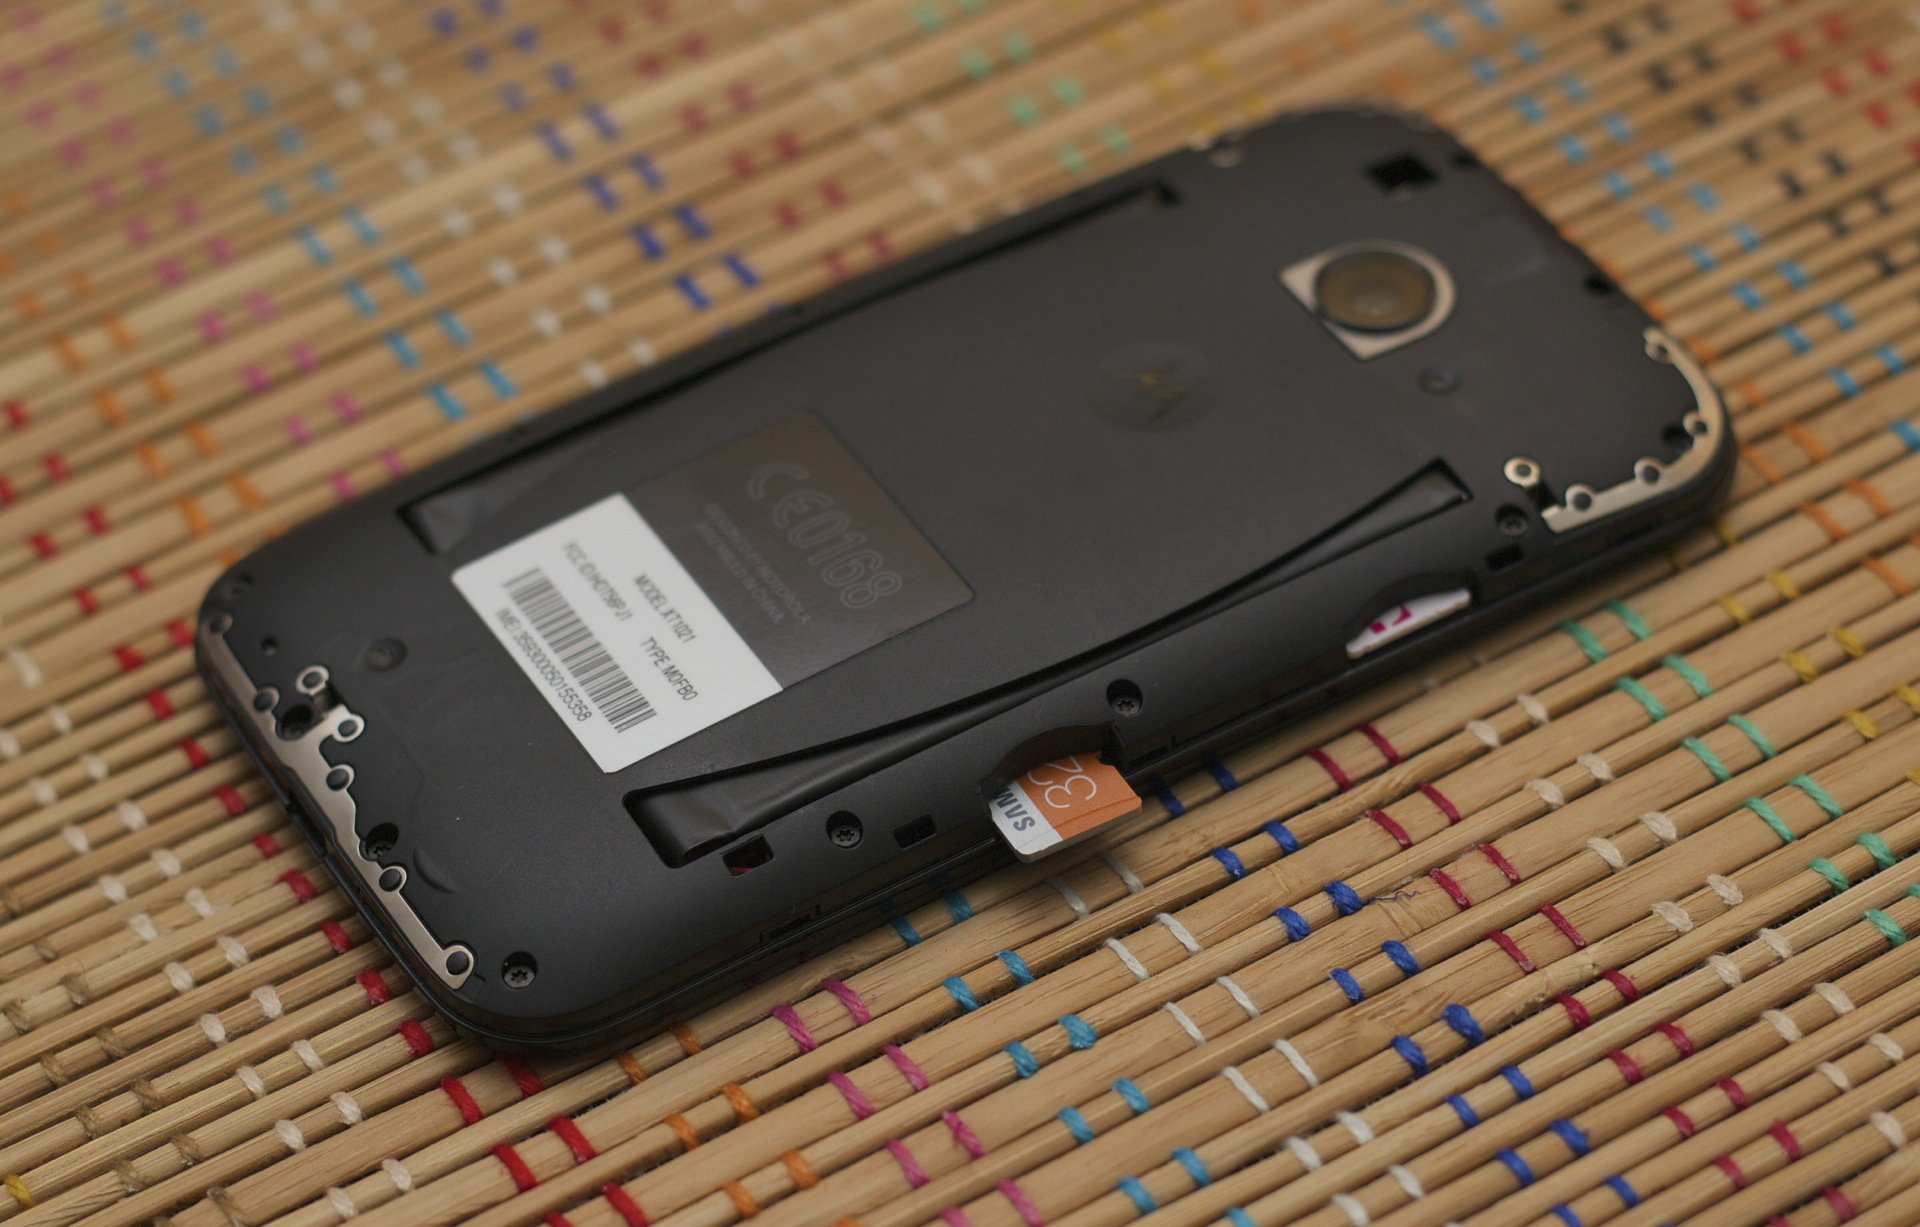 Does the motorola moto g have a sd card slot